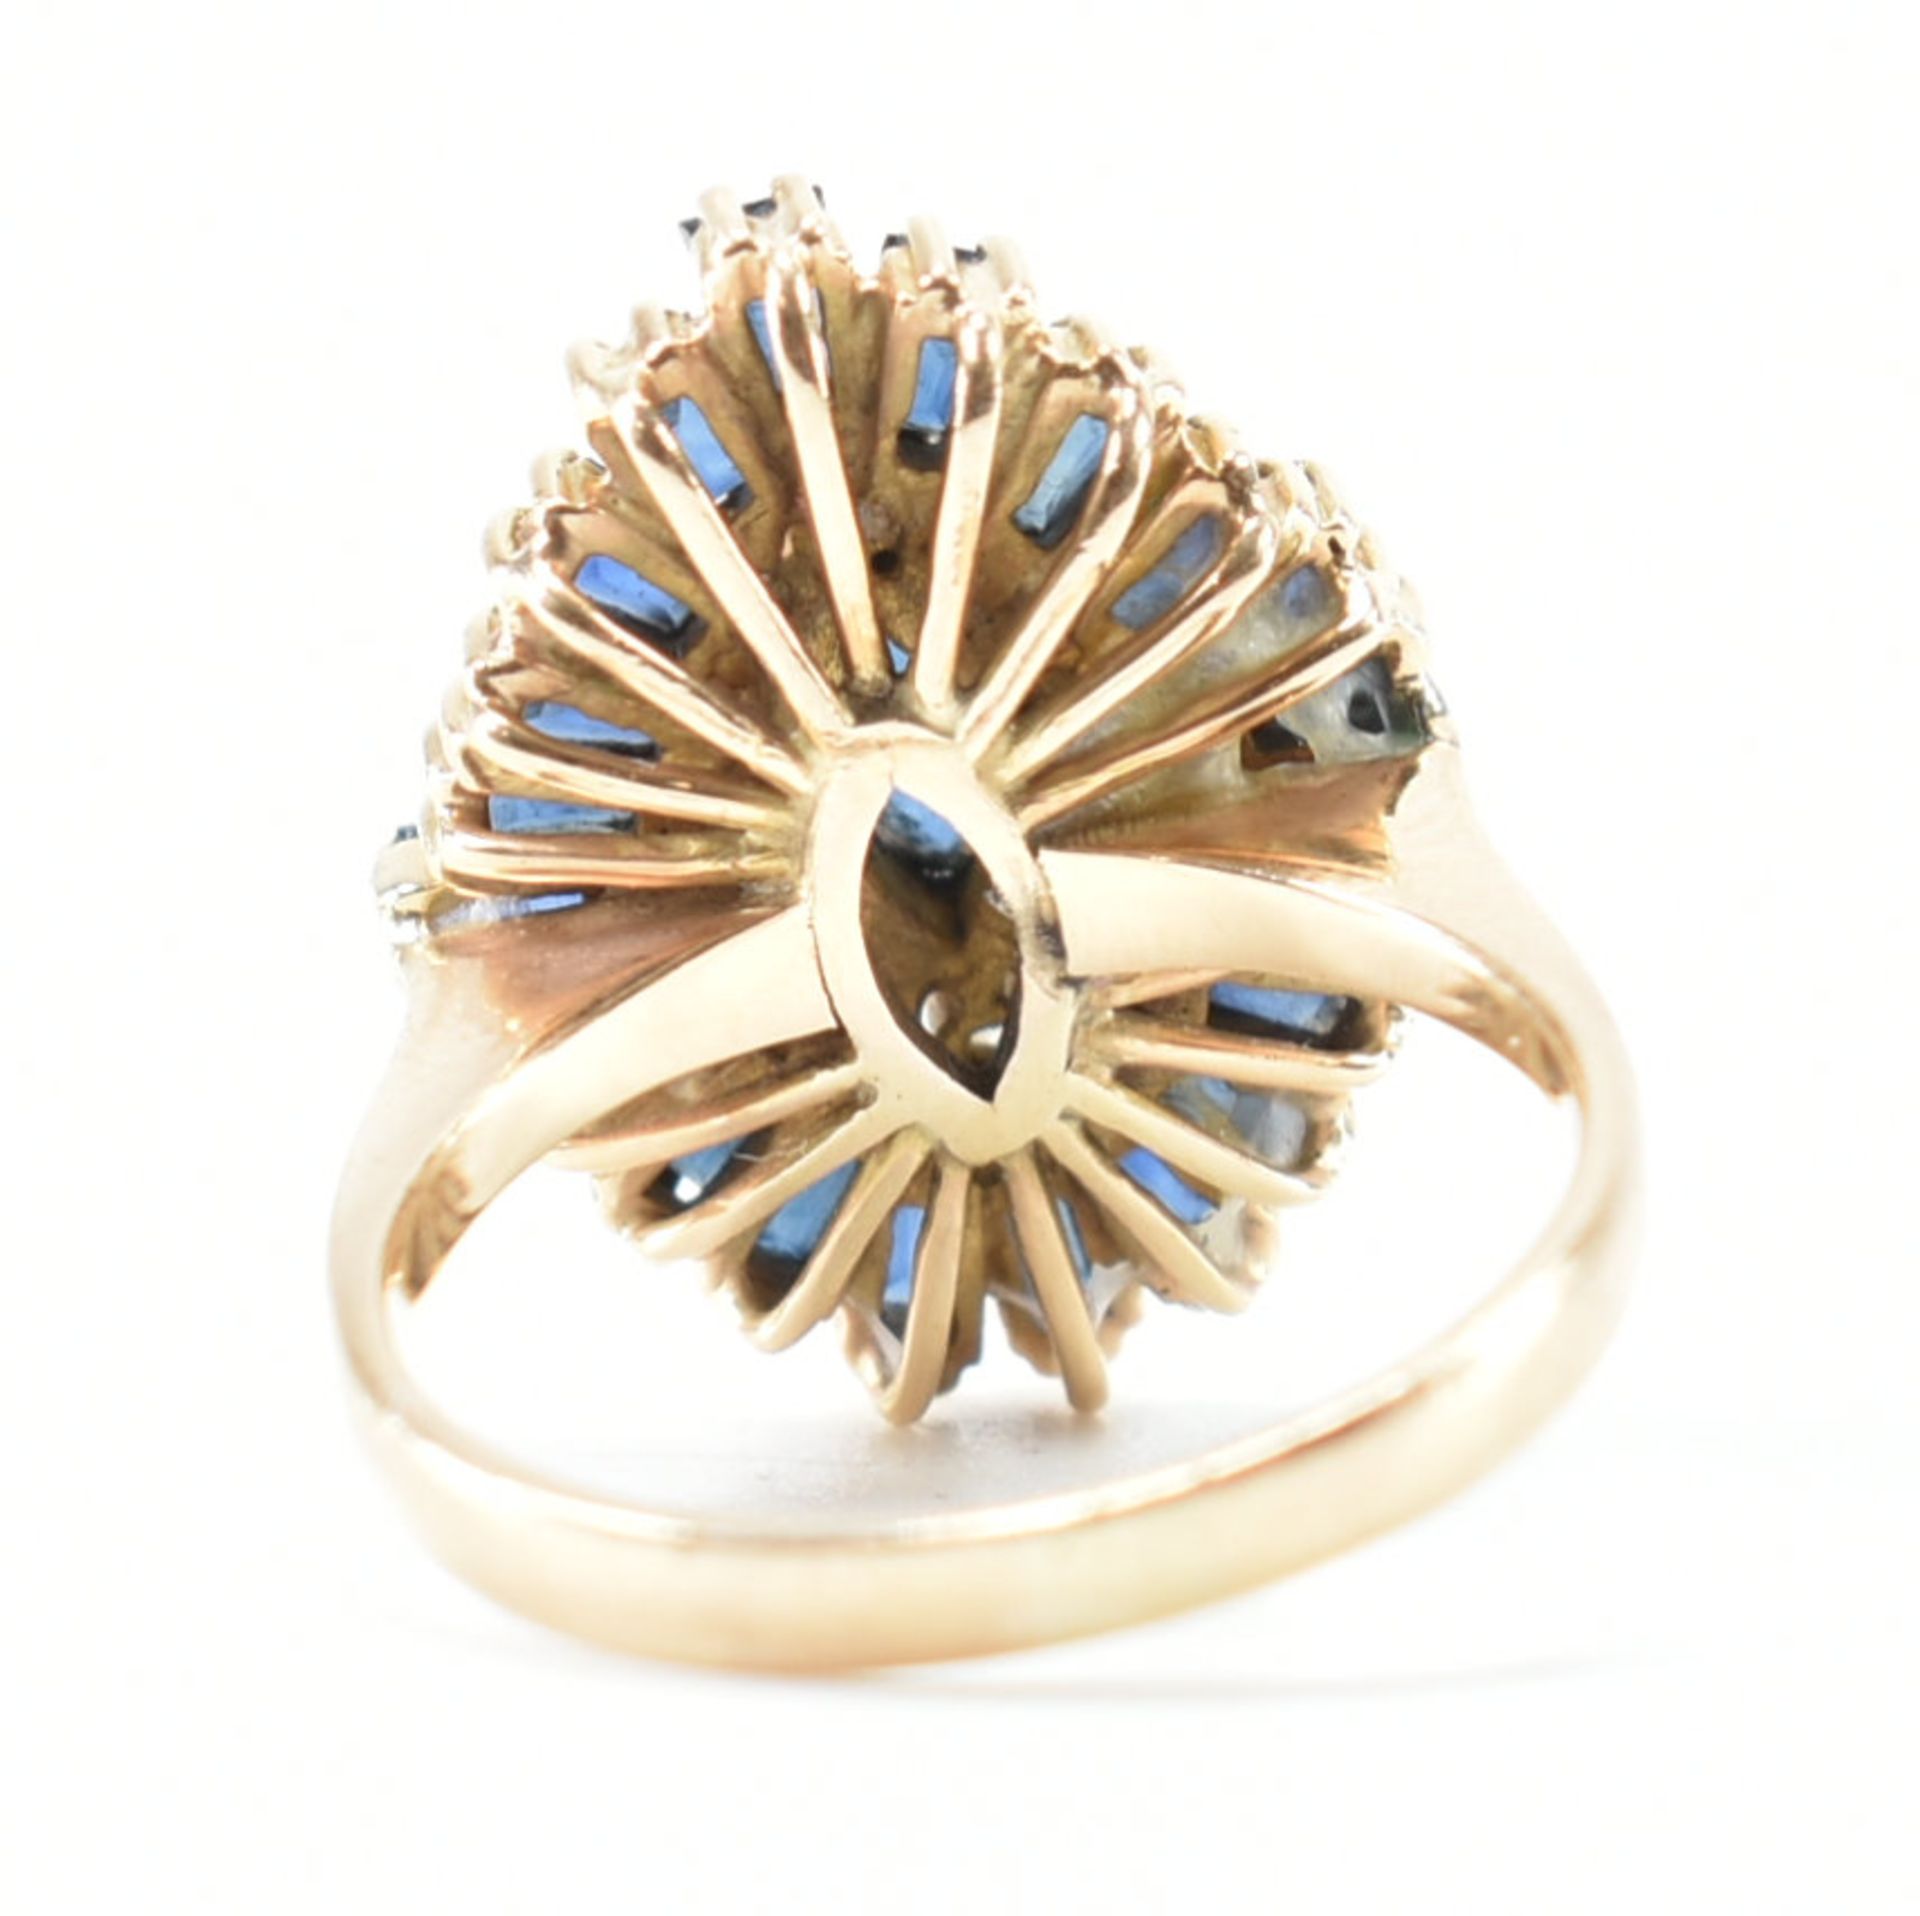 GOLD SPINEL & DIAMOND CLUSTER DRESS RING - Image 4 of 7